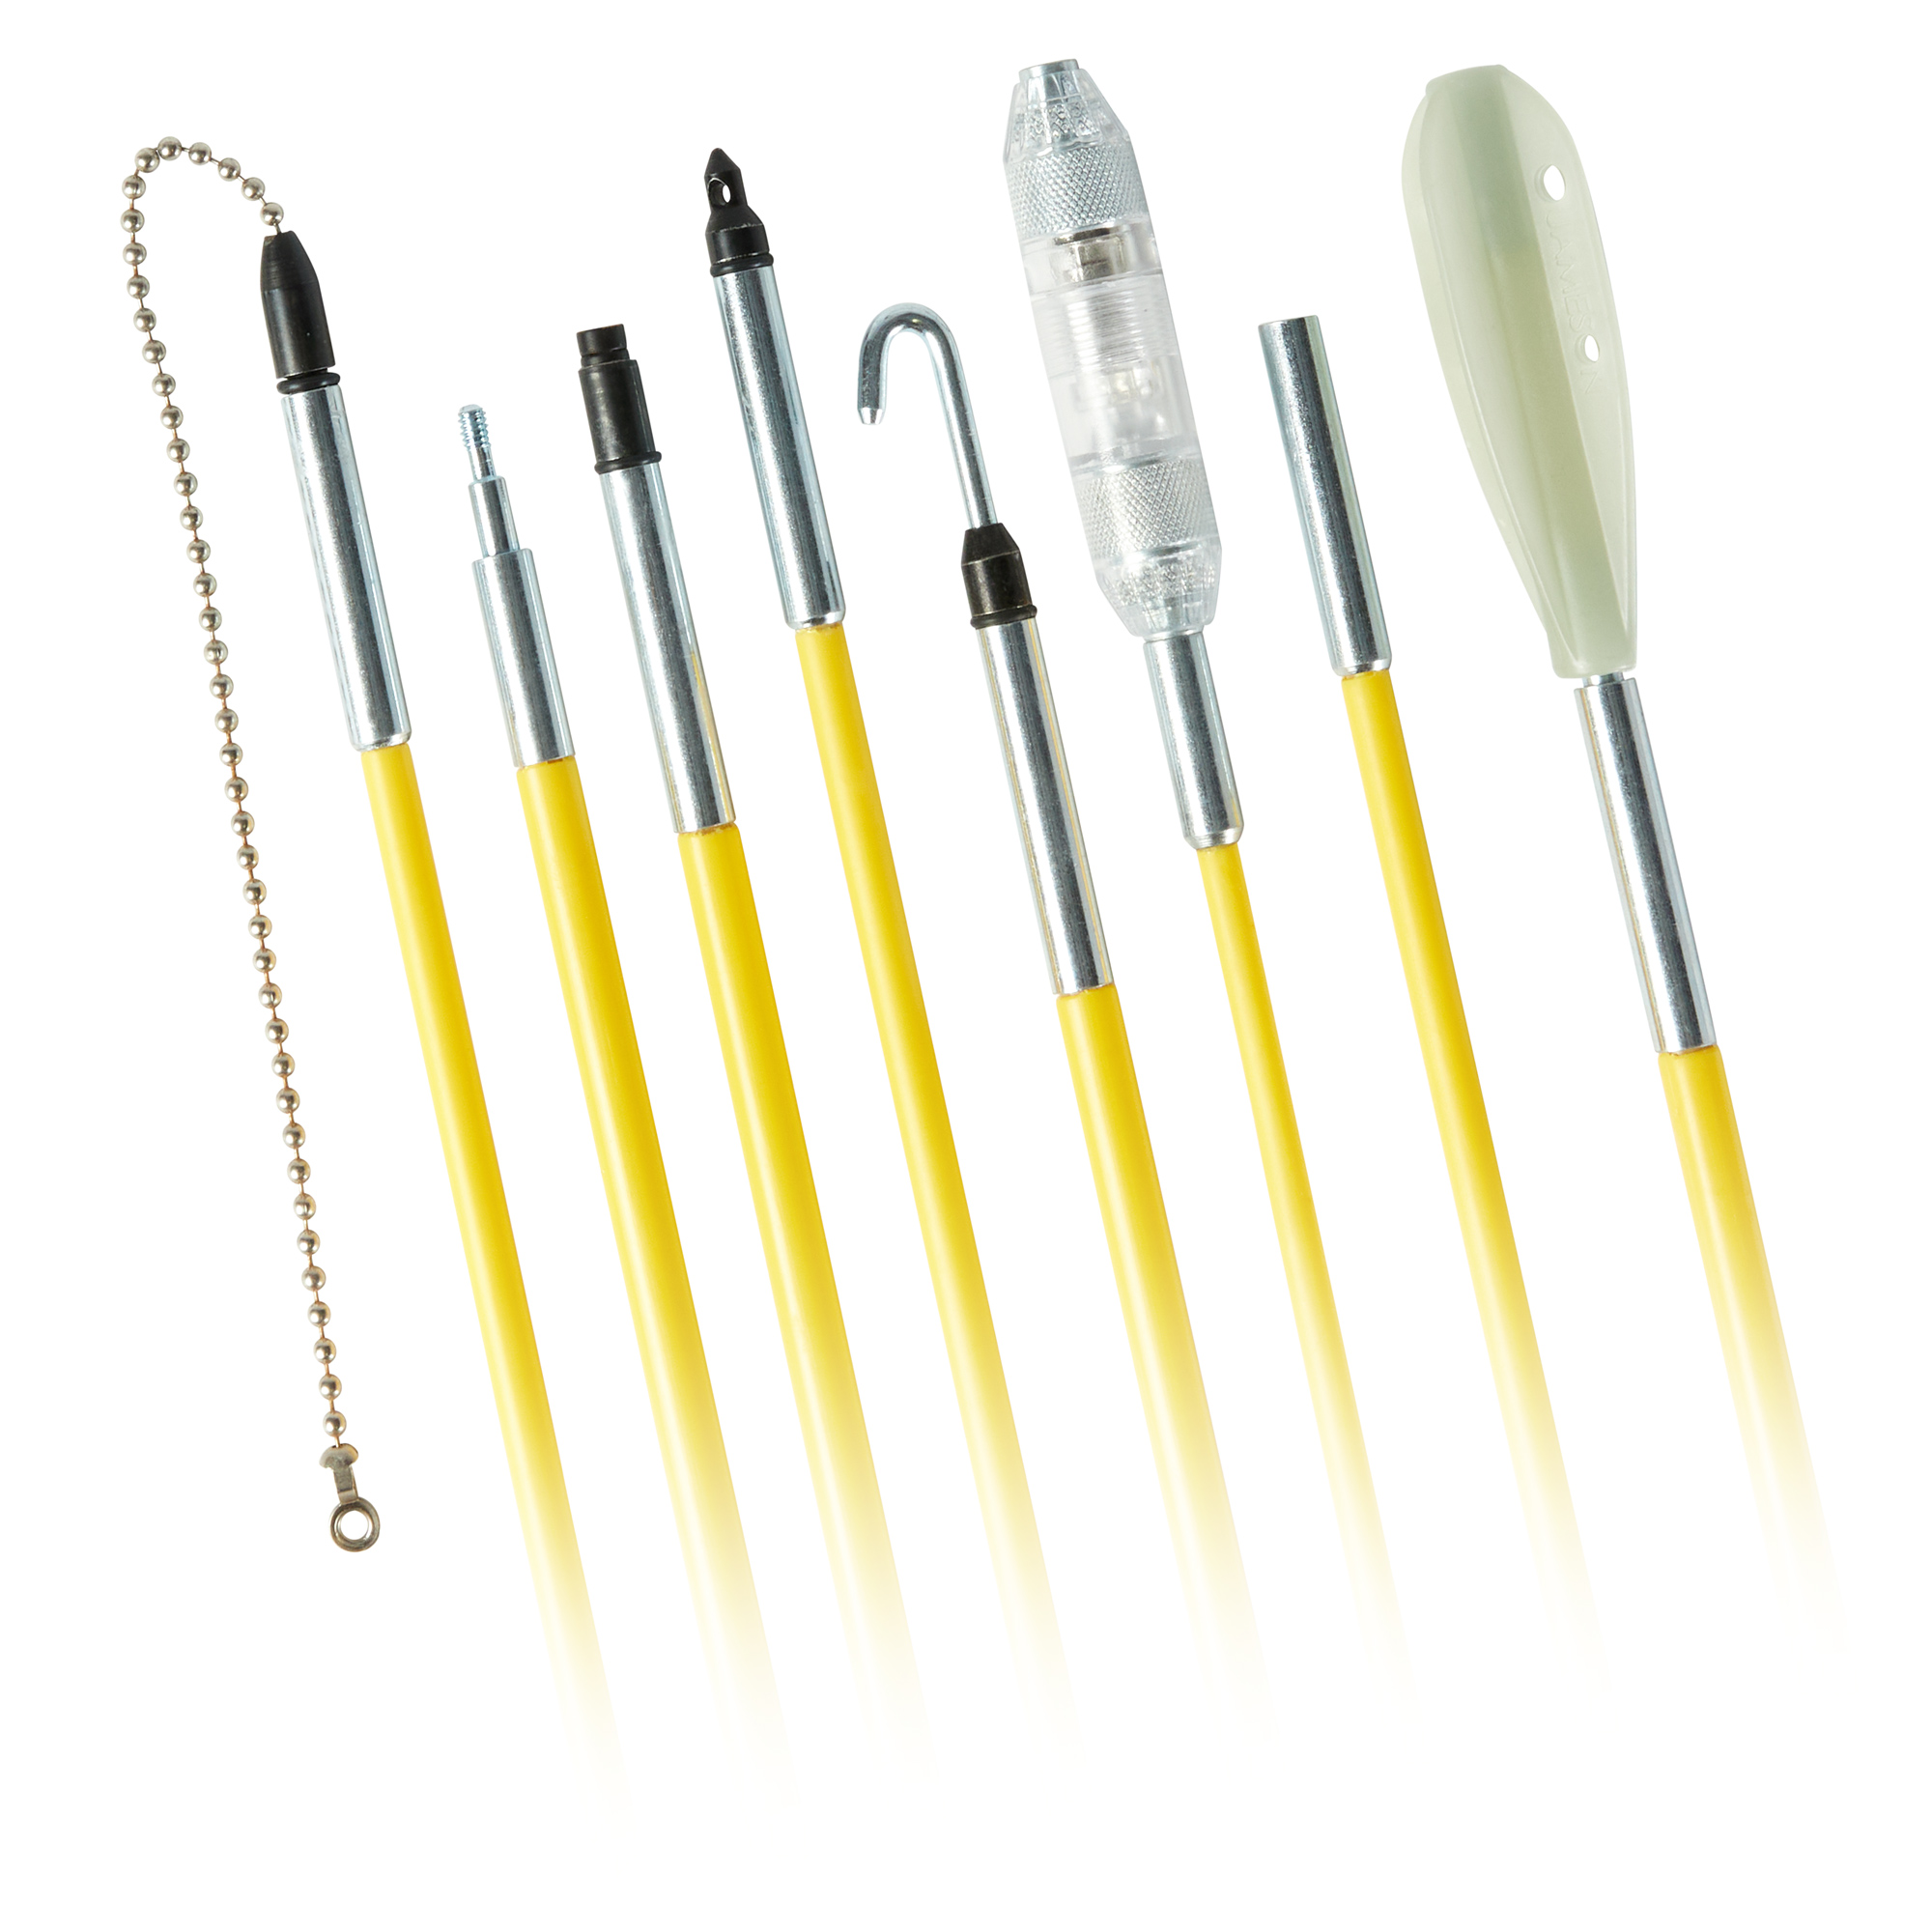 Coated Fish Rods – Jameson Tools